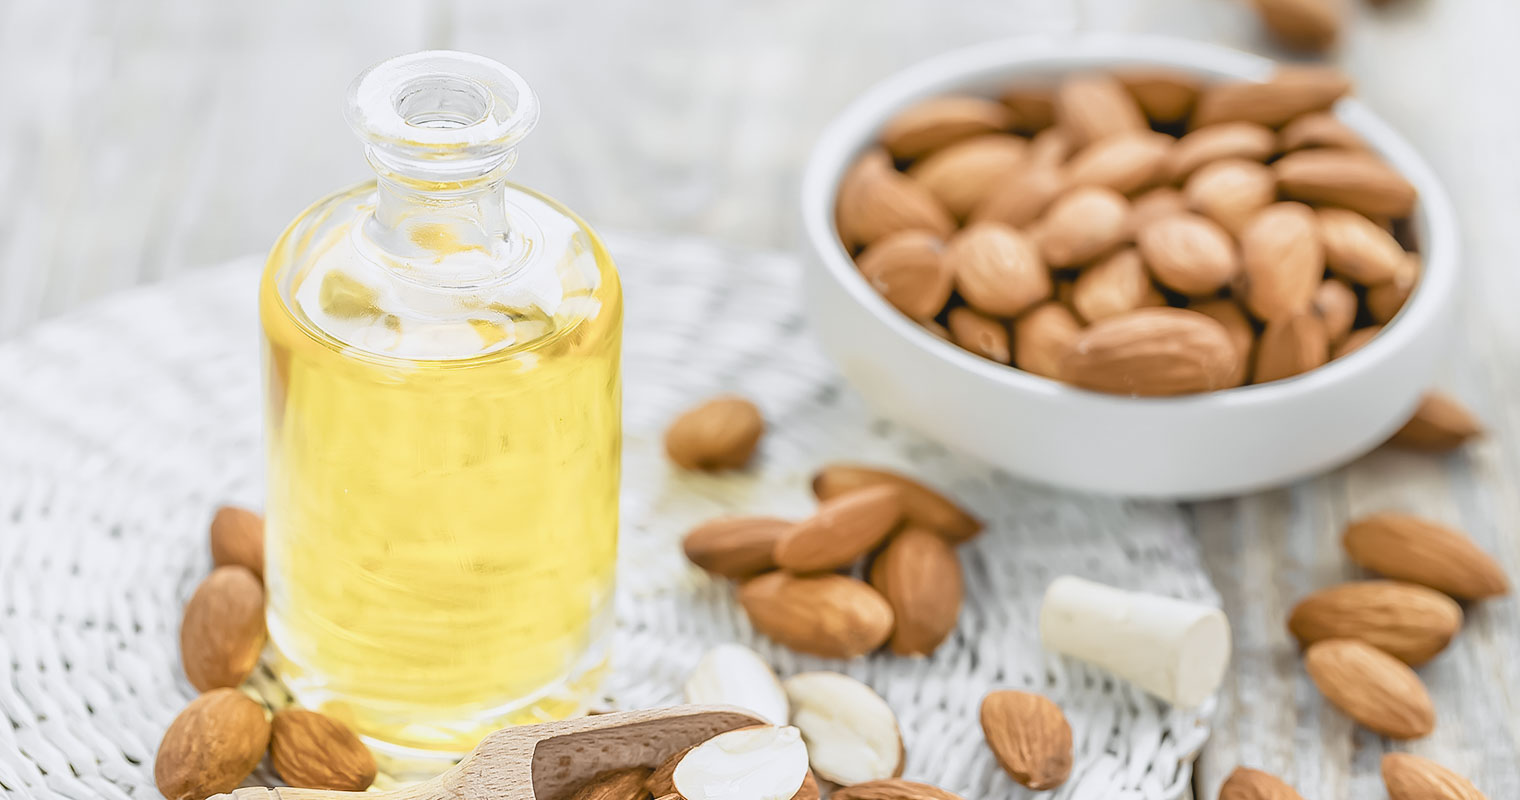 Open bottle of Almond oil and a dish with Almond seeds in the background